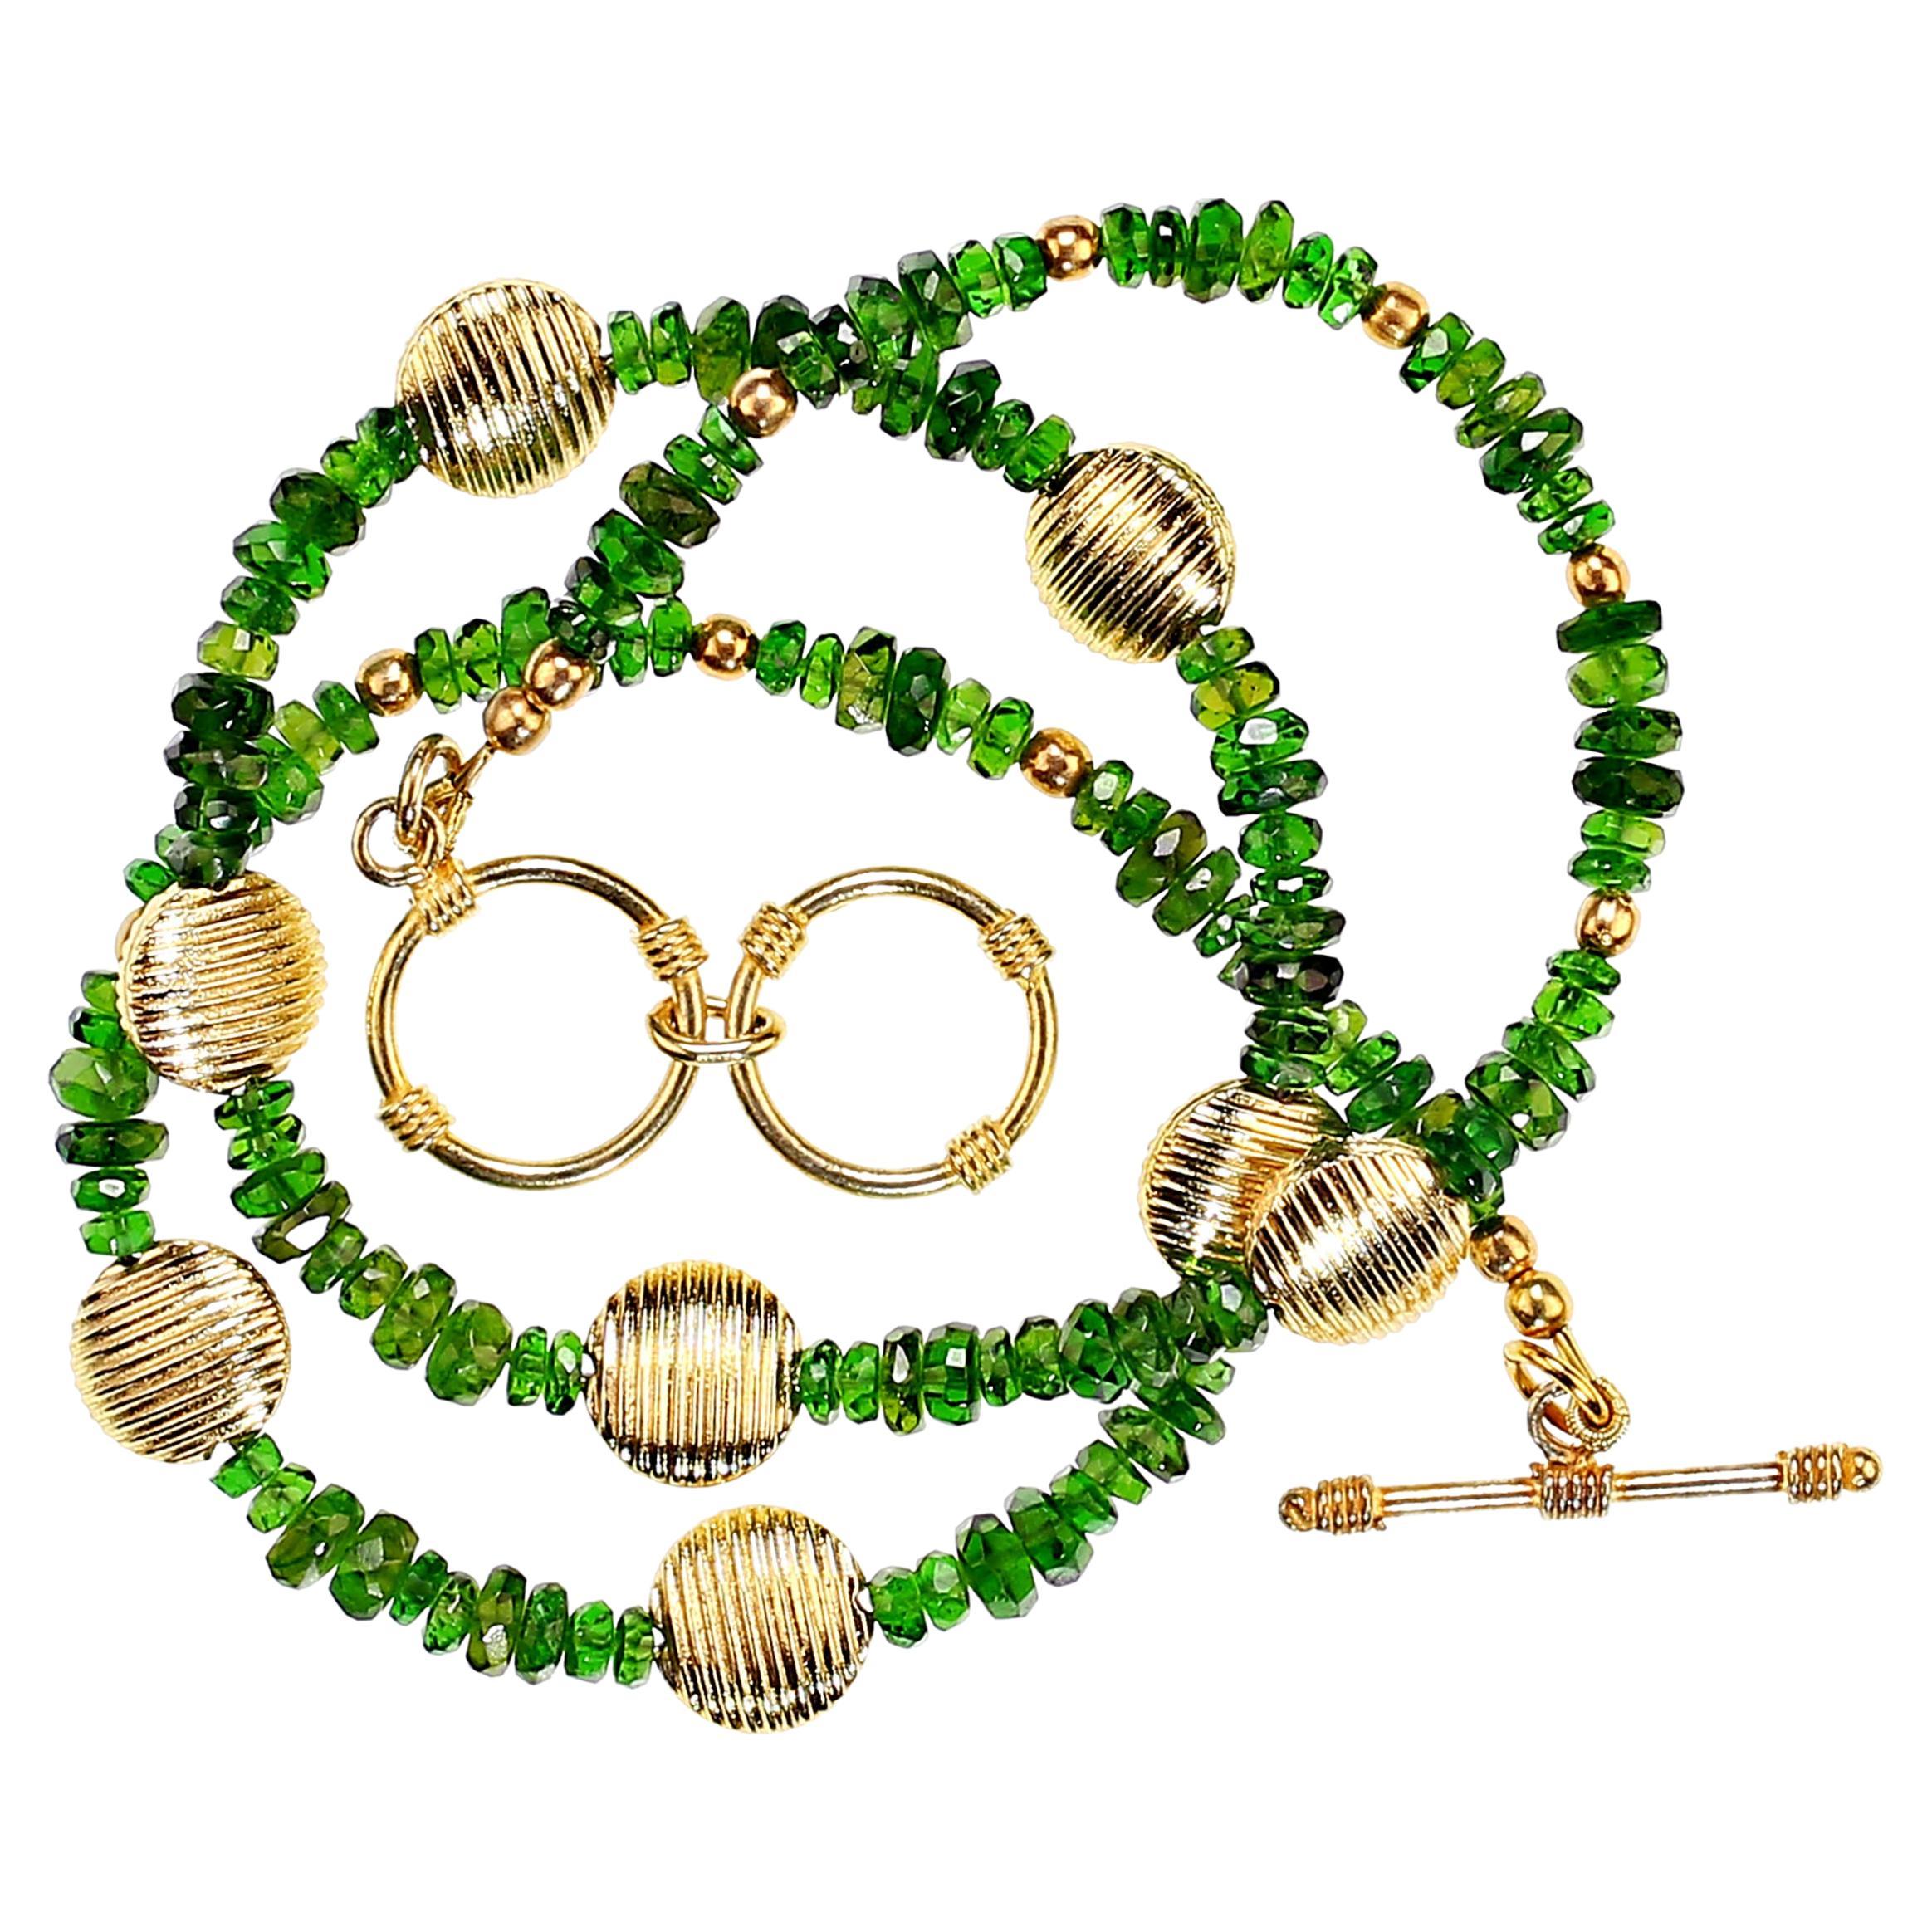 AJD Delicate Green Chrome Diopside and Goldy Accents Necklace  Great Gift! For Sale